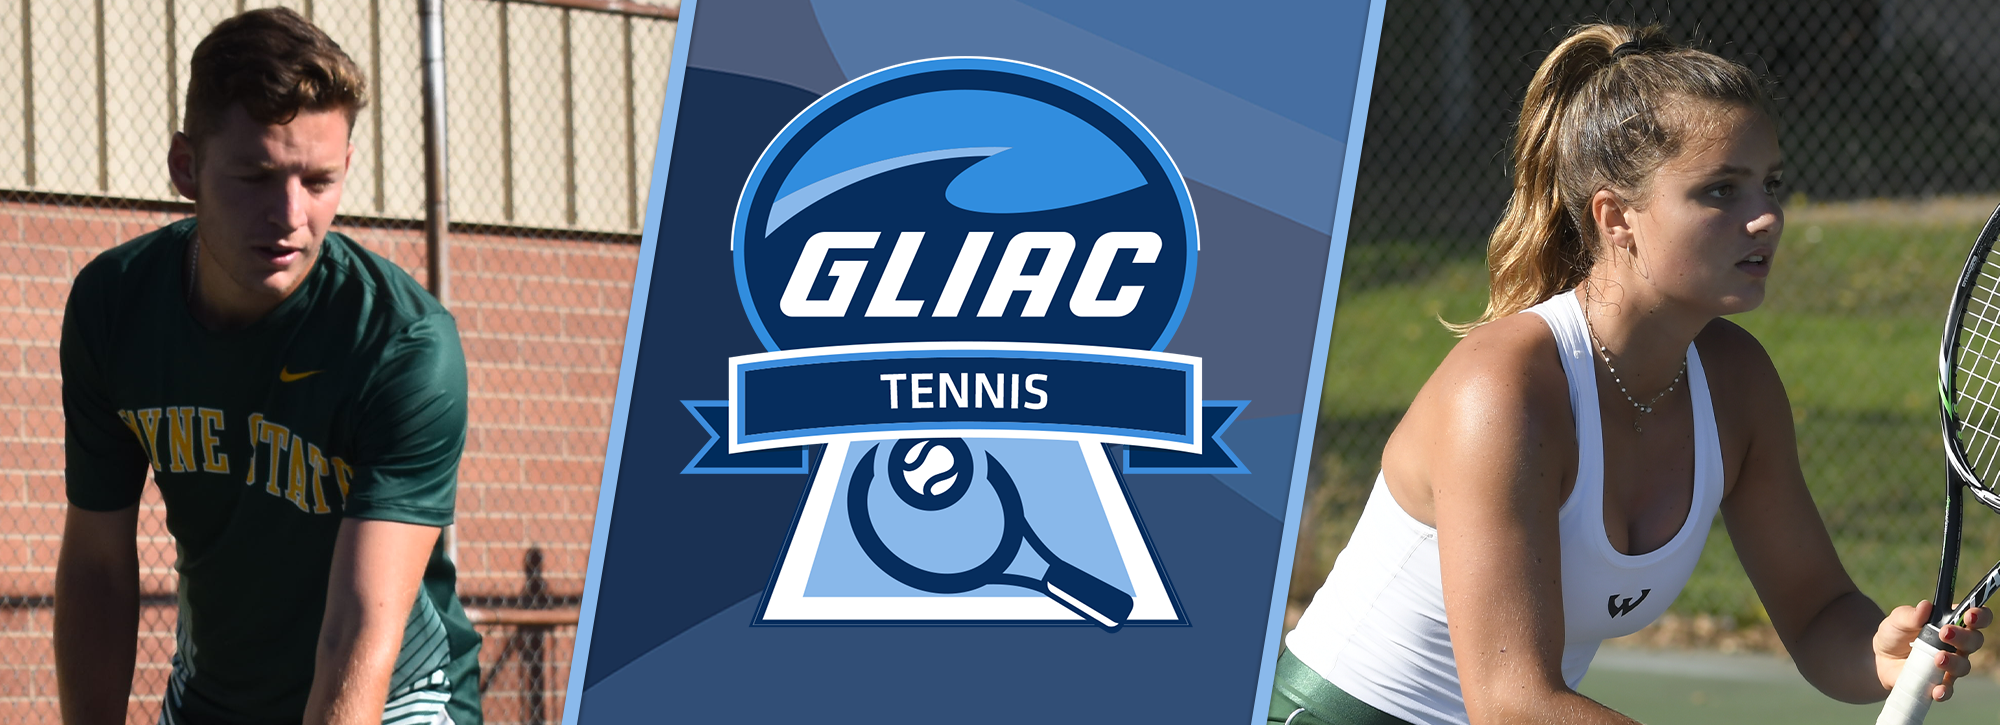 WSU's Spicer and Ruyssen named GLIAC Tennis Players of the Week